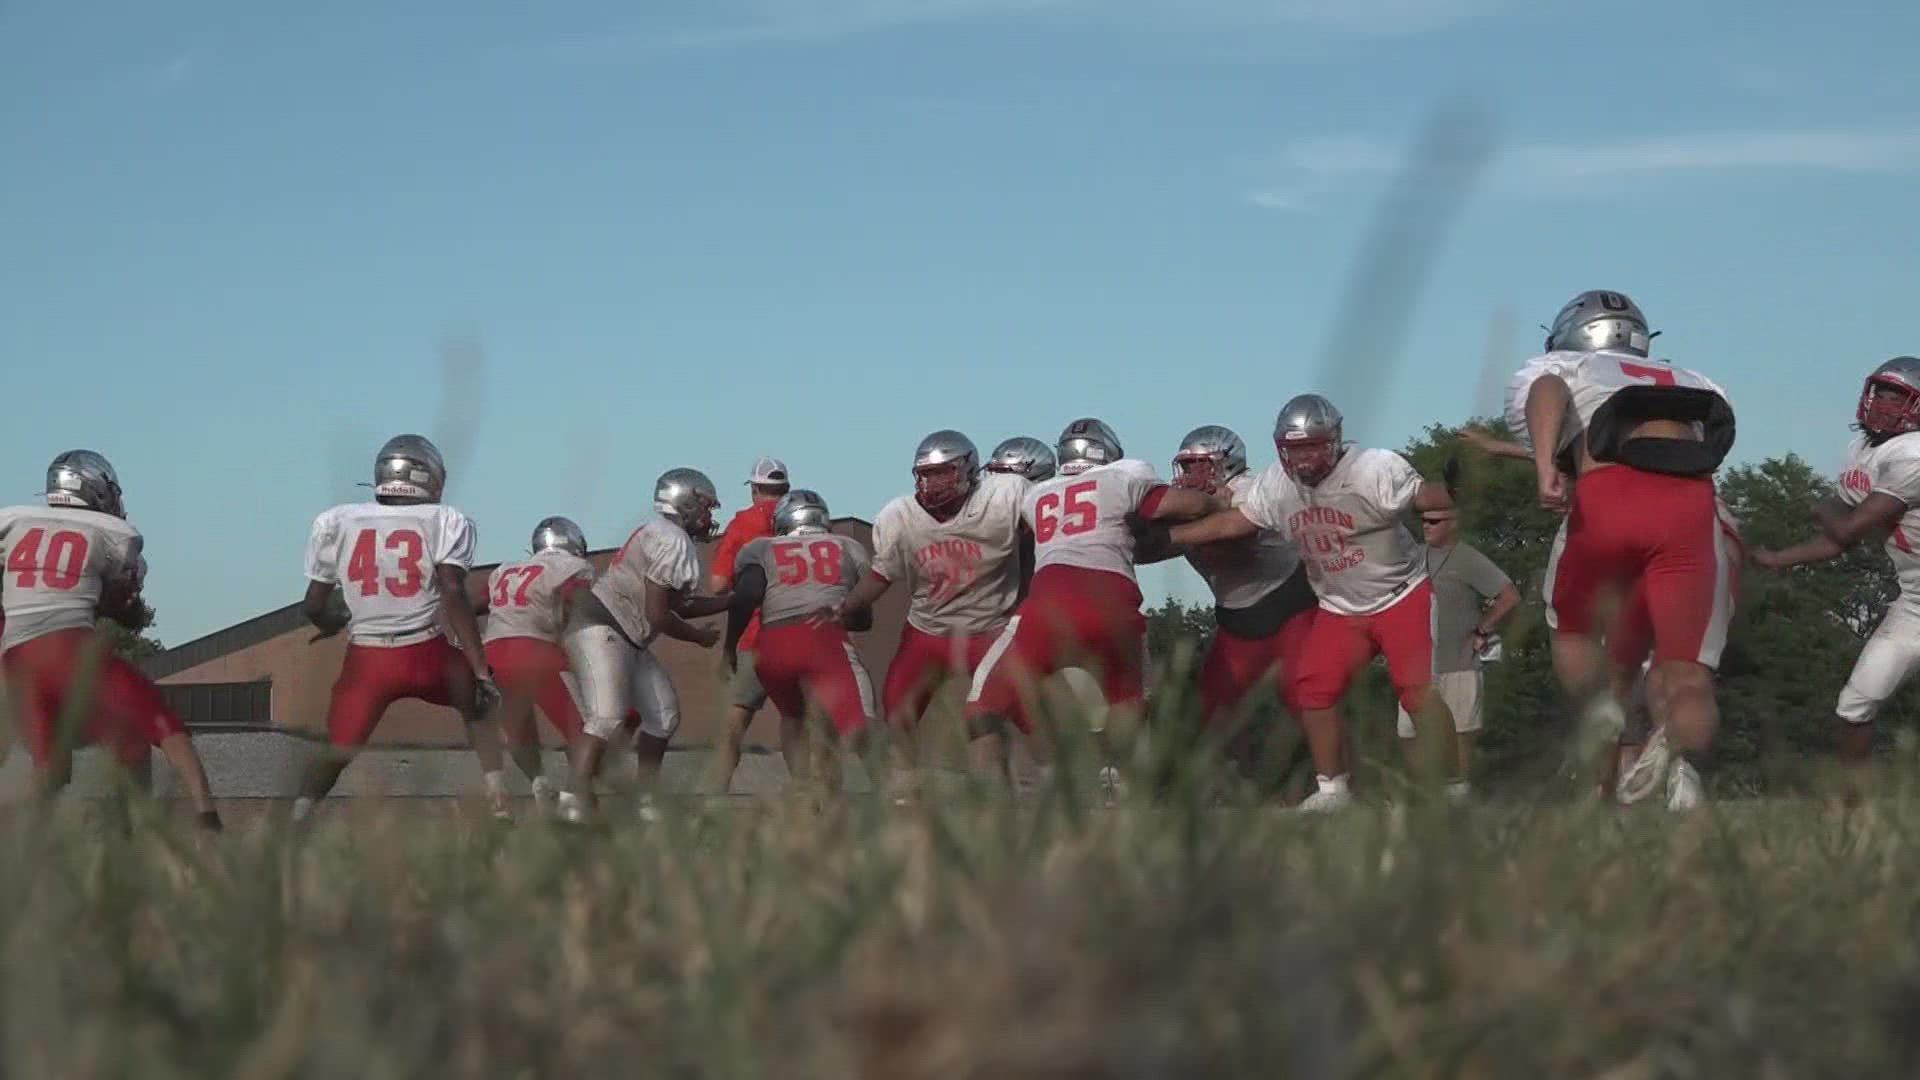 Grand Rapids Union's football program hasn't won much in recent years. But a well-known head coach, combined with a culture change, has the Red Hawks 2-0.